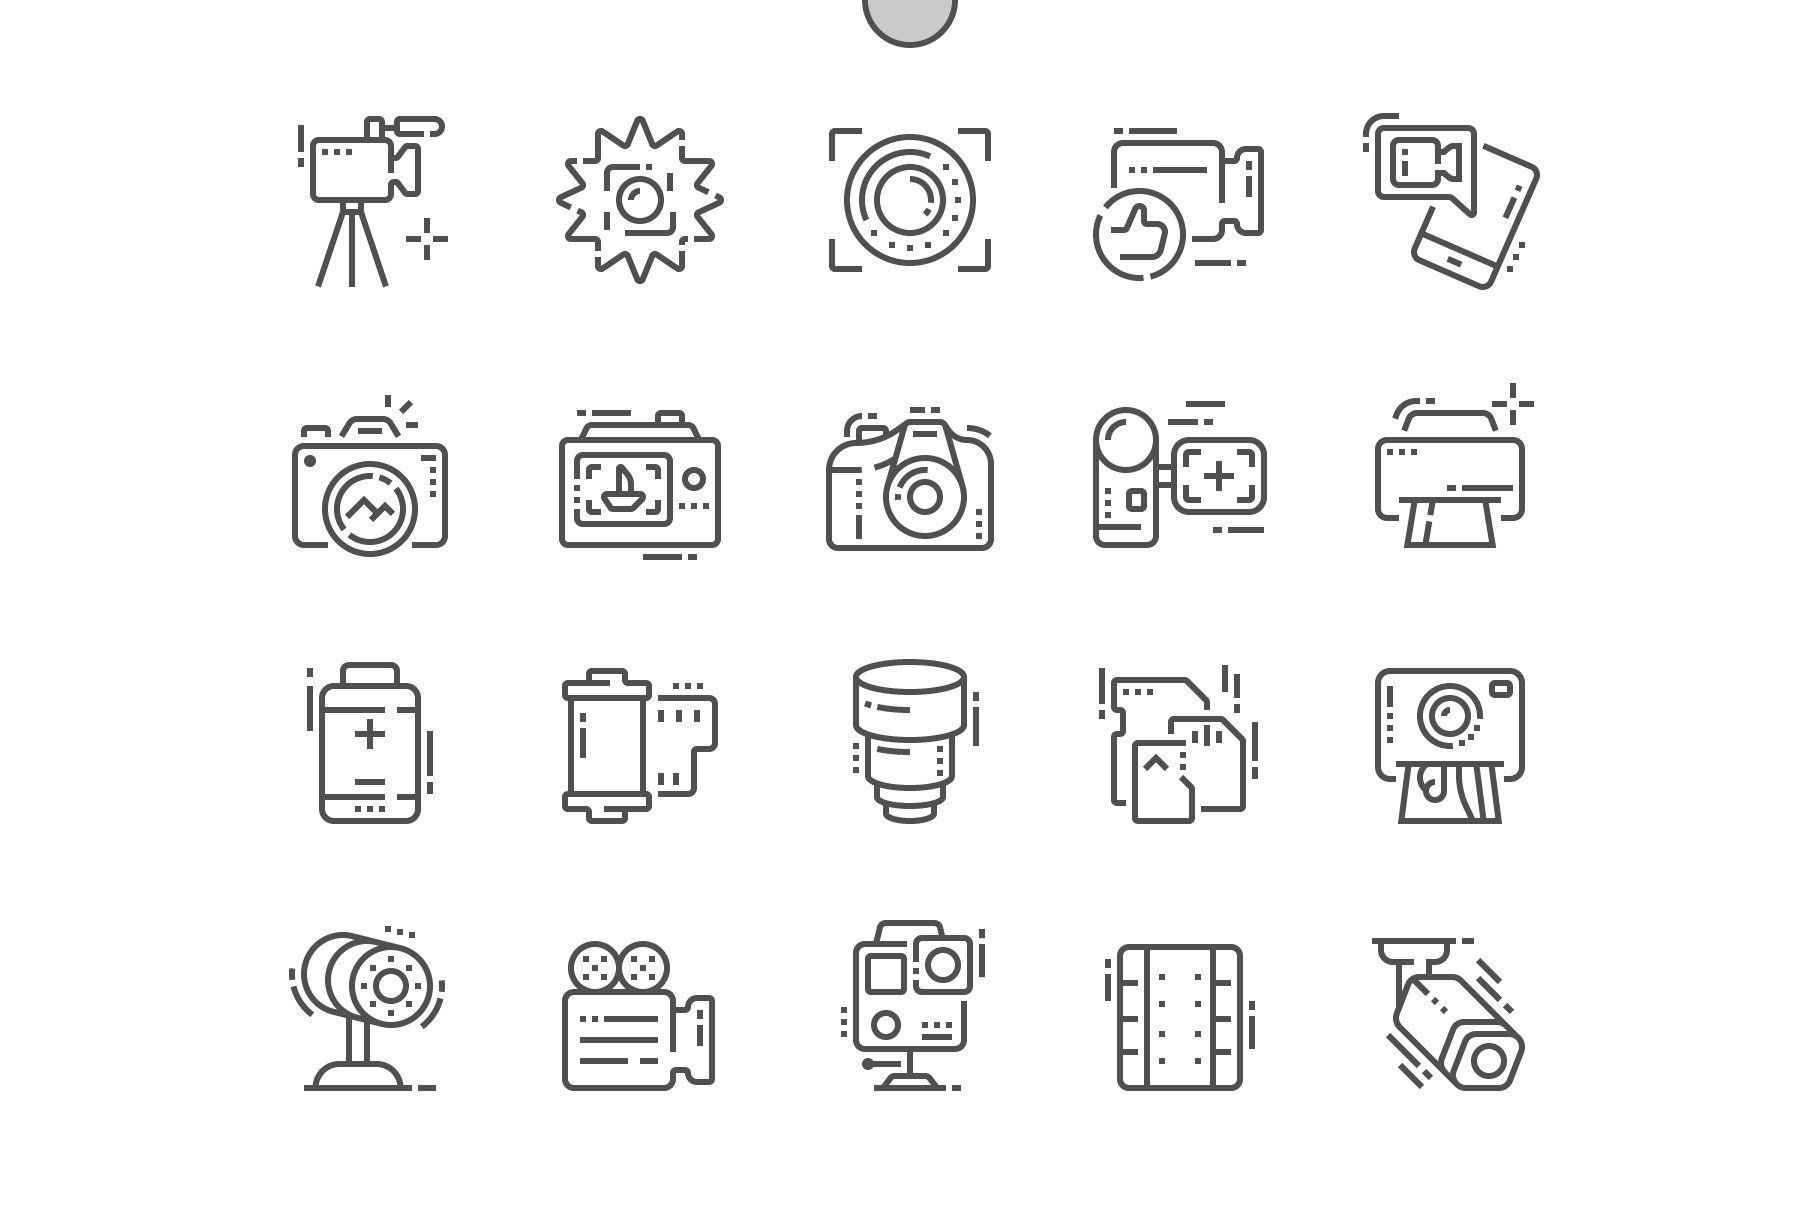 Different line style icons seamless pattern camera